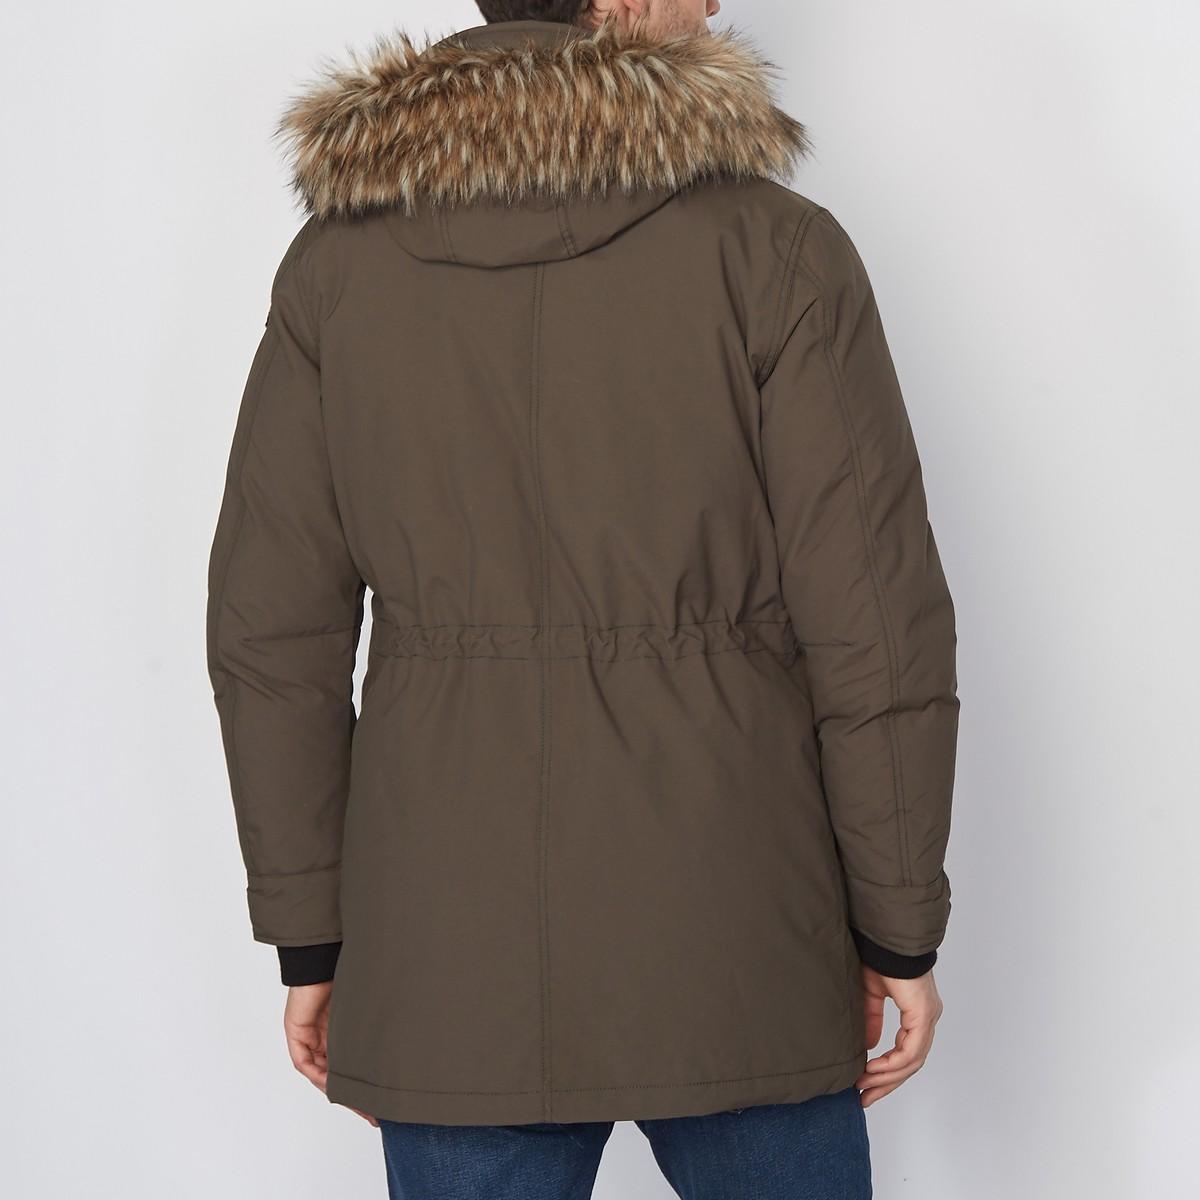 Lyst - Schott Nyc Plume Hooded Parka in Natural for Men